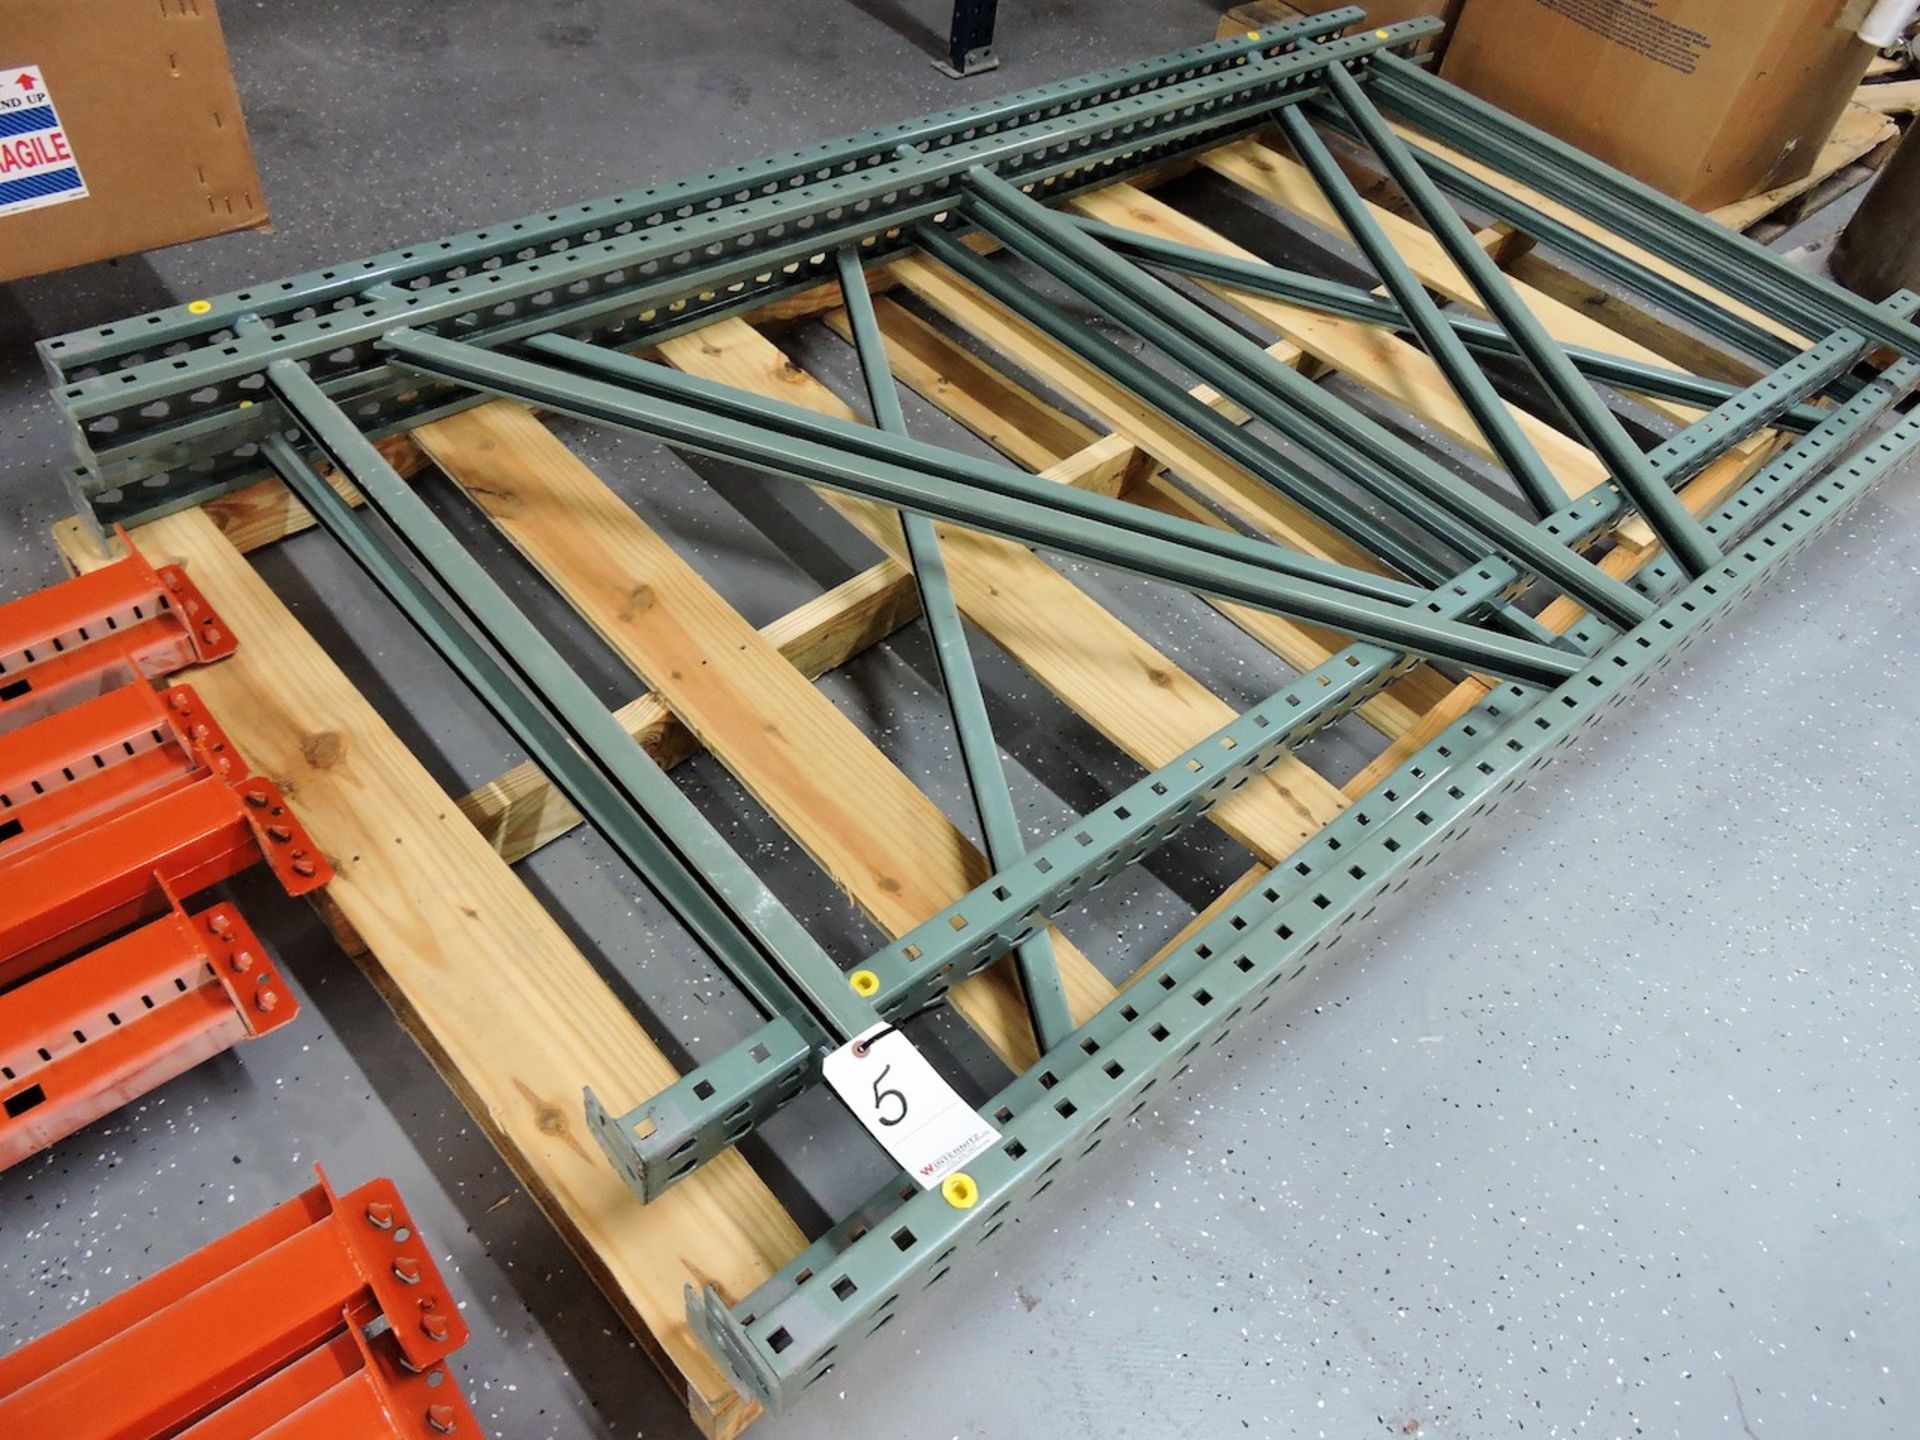 NEW ULINE PALLET RACKING - 6 UPRIGHTS 10 BEAMS 48” WIDE X 96” LONG X 96” HIGH 5000 LB LOAD CAP.